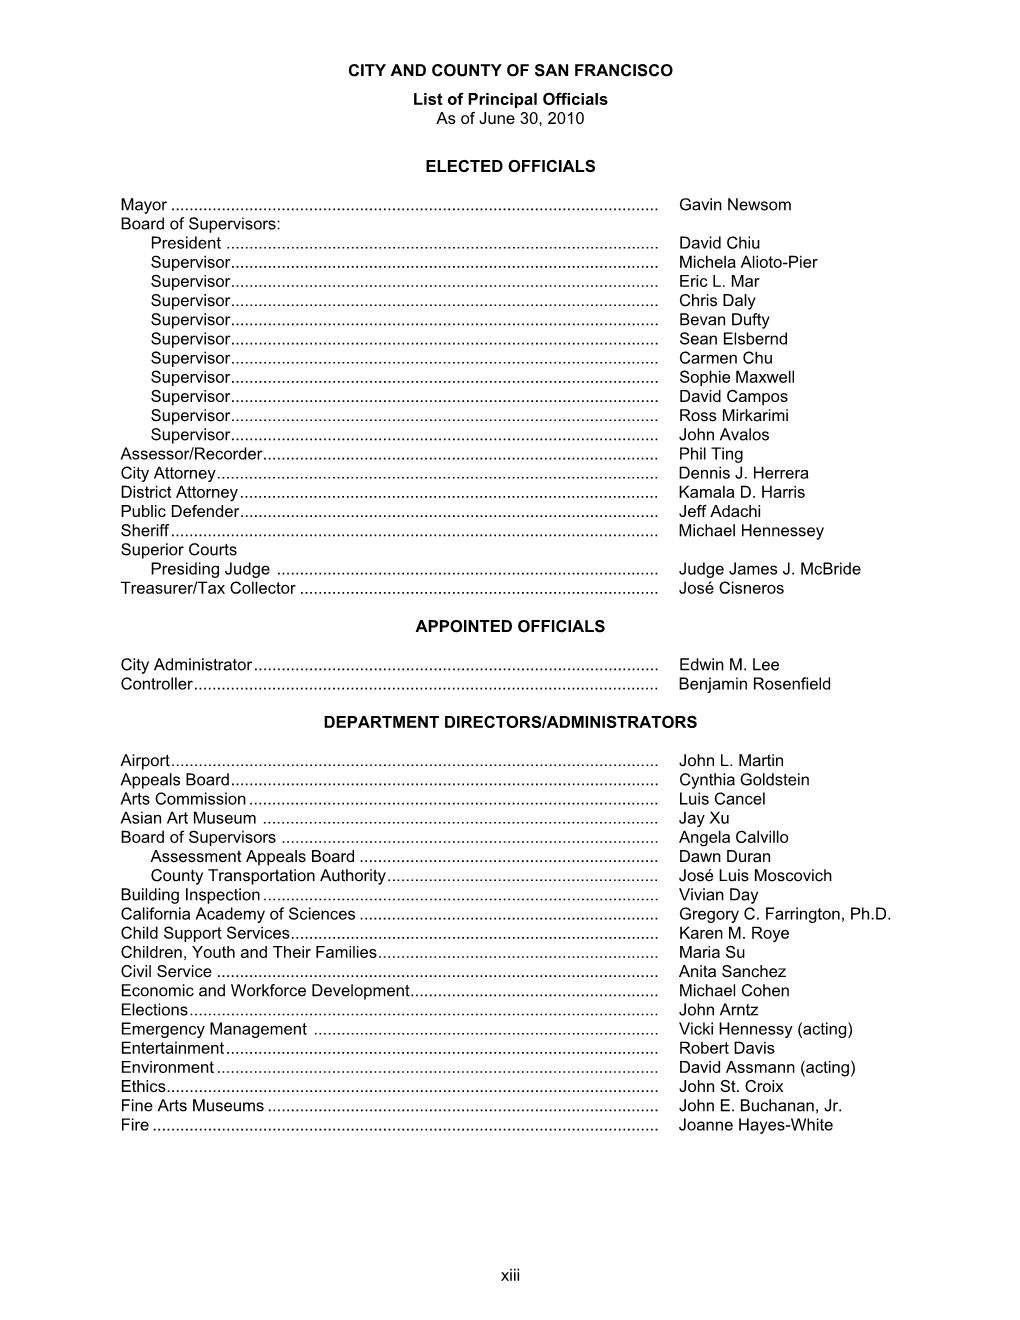 CITY and COUNTY of SAN FRANCISCO List of Principal Officials As of June 30, 2010